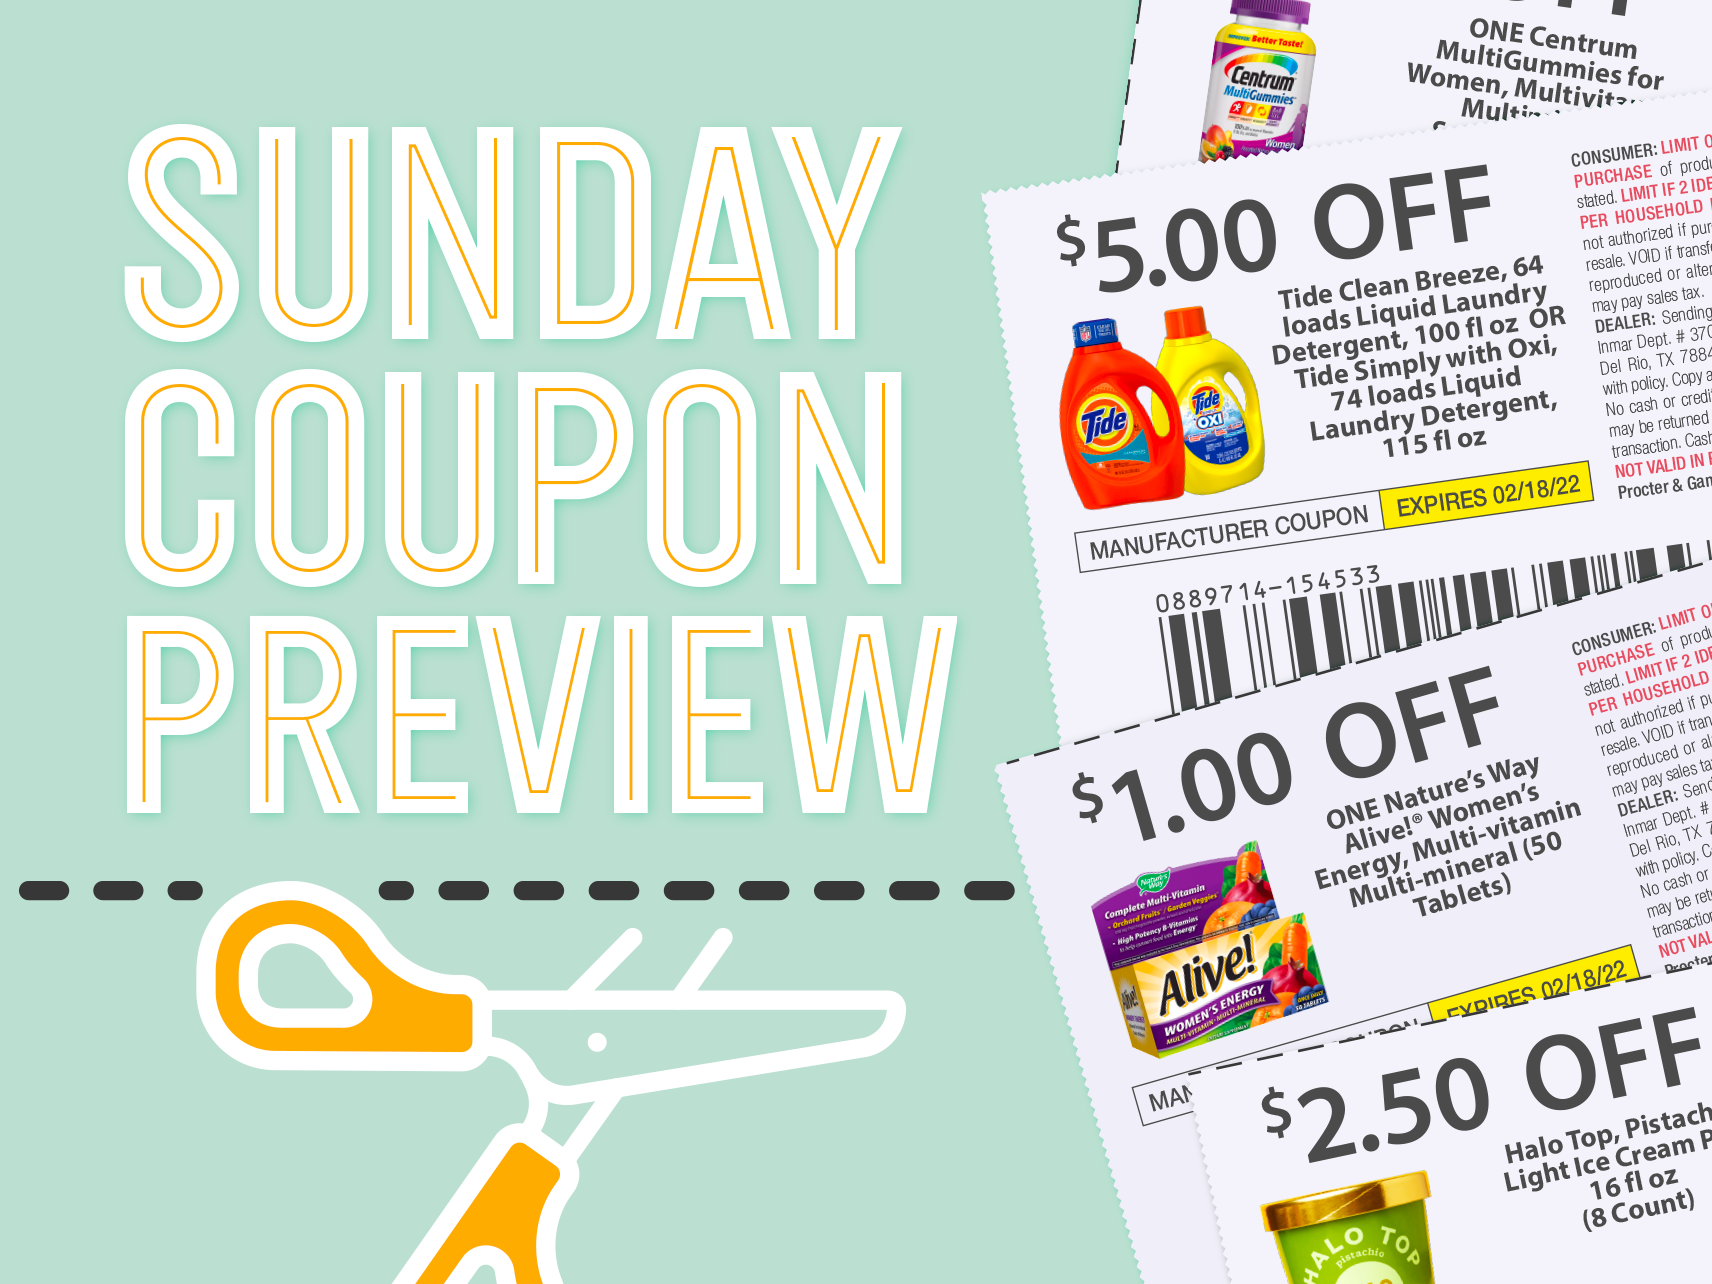 Sunday Coupon Preview For 1/15 – Two Inserts